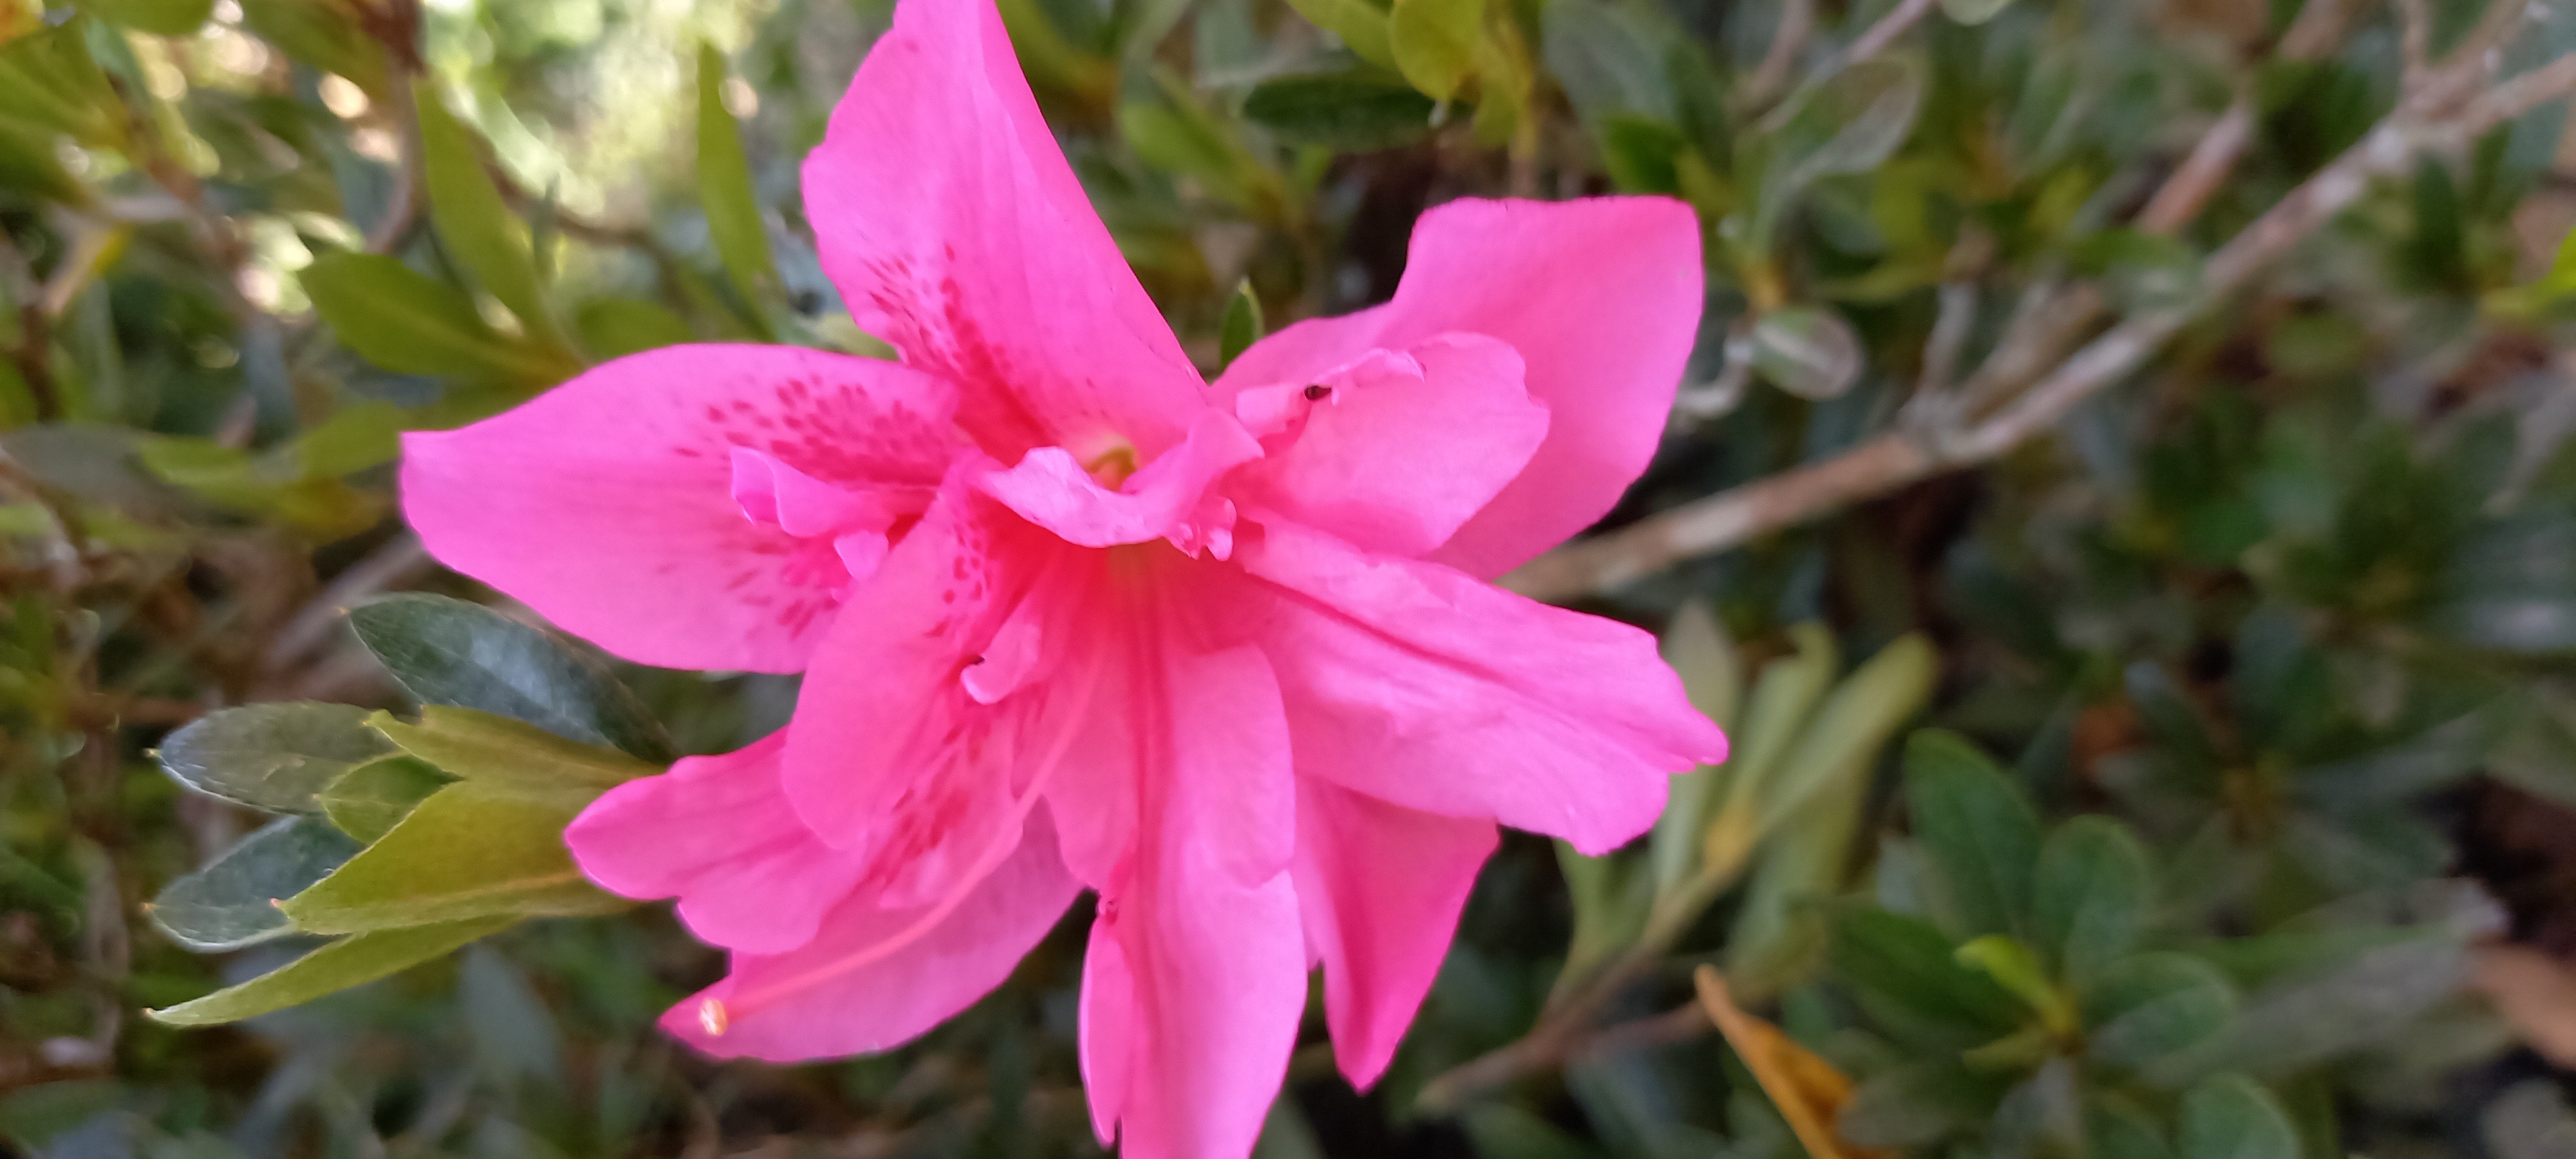 Rhododendron japonica 'Rose King' 2